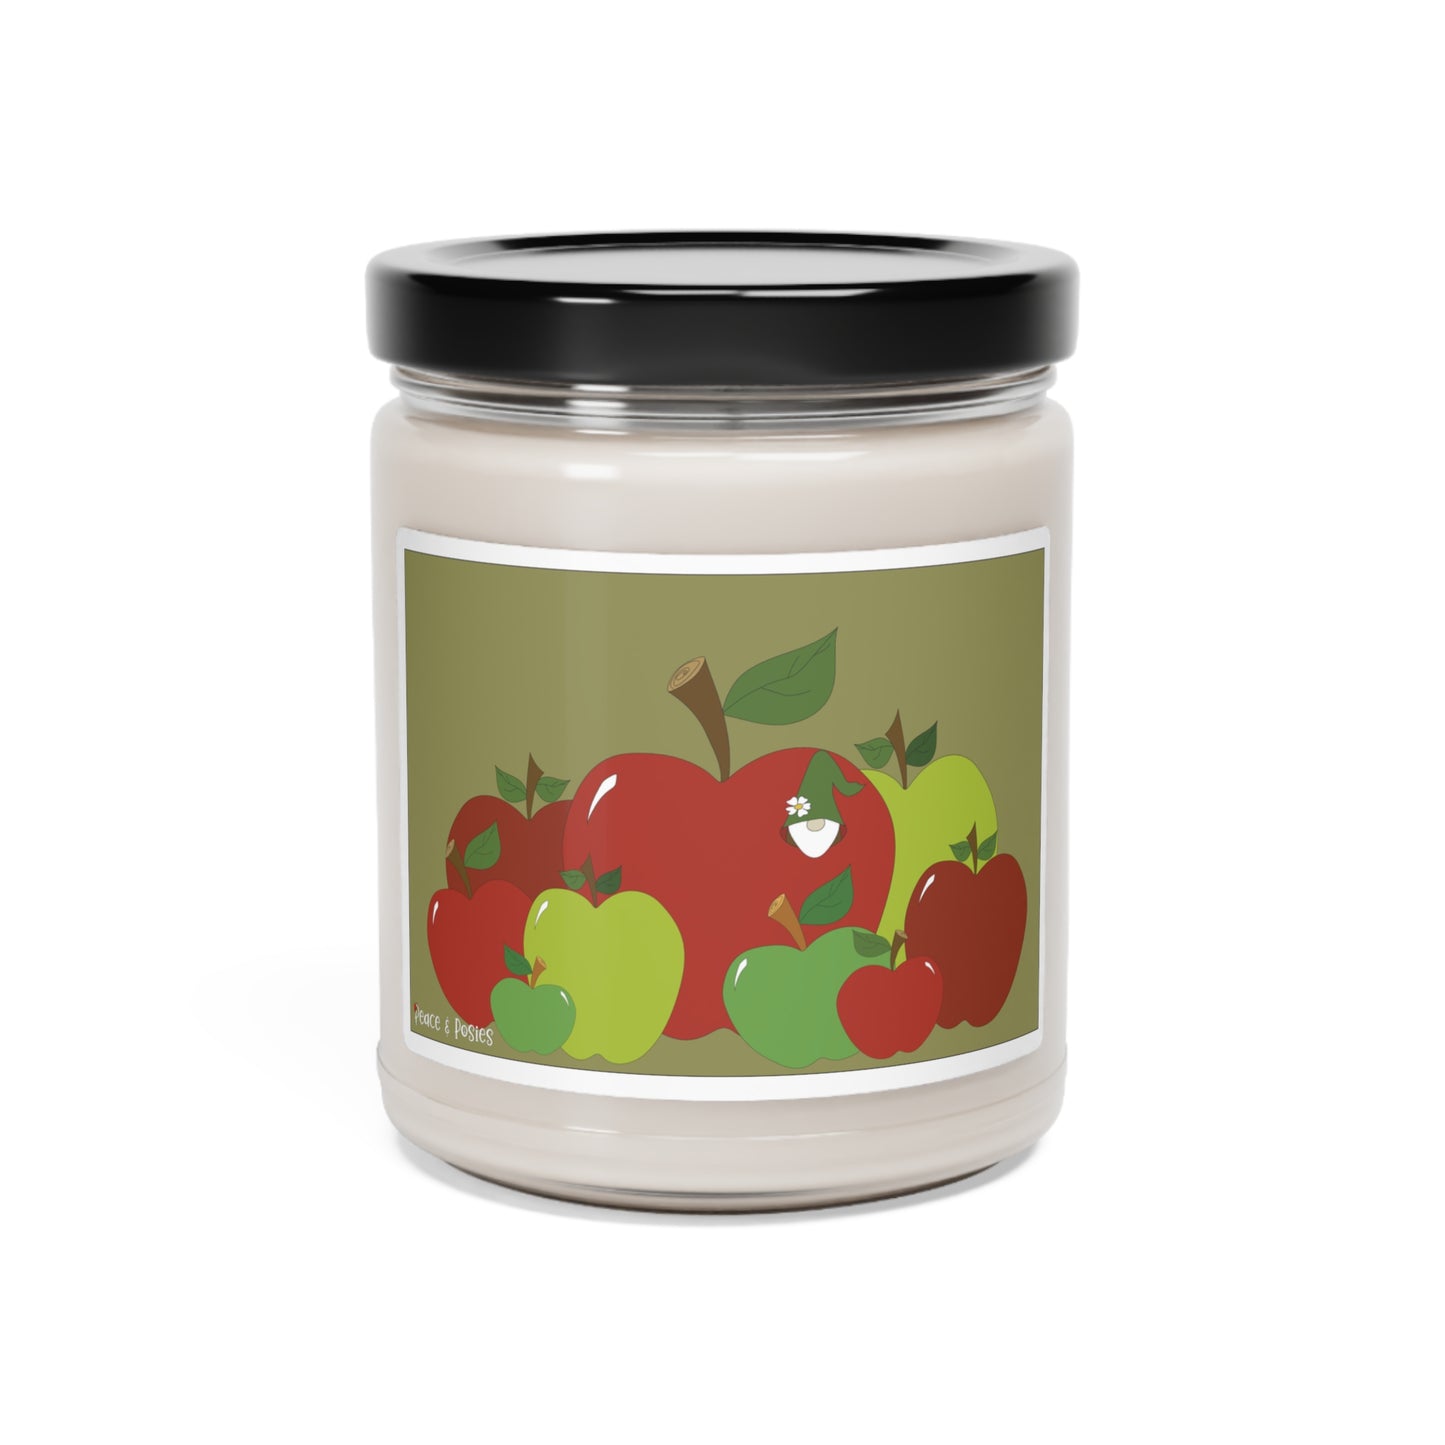 Picking Apples Soy Candle, 9oz